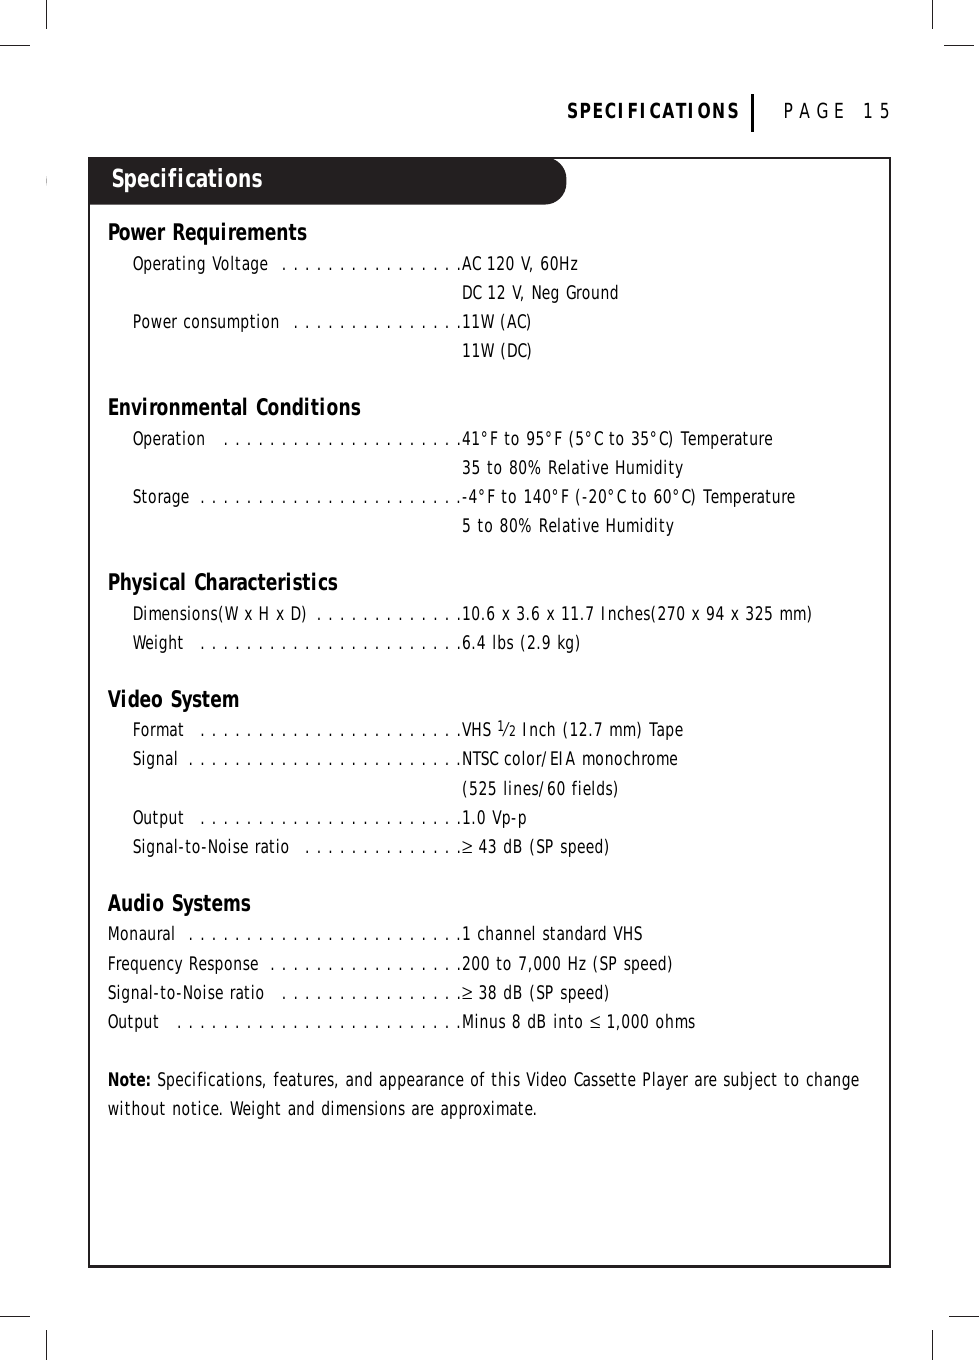 SpecificationsSPECIFICATIONS PAGE 15Power RequirementsOperating Voltage  . . . . . . . . . . . . . . . .AC 120 V, 60HzDC 12 V, Neg GroundPower consumption  . . . . . . . . . . . . . . .11W (AC)11W (DC)Environmental ConditionsOperation  . . . . . . . . . . . . . . . . . . . . .41°F to 95°F (5°C to 35°C) Temperature35 to 80% Relative HumidityStorage  . . . . . . . . . . . . . . . . . . . . . . .-4°F to 140°F (-20°C to 60°C) Temperature5 to 80% Relative HumidityPhysical CharacteristicsDimensions(W x H x D) . . . . . . . . . . . . .10.6 x 3.6 x 11.7 Inches(270 x 94 x 325 mm)Weight  . . . . . . . . . . . . . . . . . . . . . . .6.4 lbs (2.9 kg)Video SystemFormat  . . . . . . . . . . . . . . . . . . . . . . .VHS 1⁄2Inch (12.7 mm) TapeSignal  . . . . . . . . . . . . . . . . . . . . . . . .NTSC color/EIA monochrome(525 lines/60 fields)Output  . . . . . . . . . . . . . . . . . . . . . . .1.0 Vp-pSignal-to-Noise ratio  . . . . . . . . . . . . . .≥43 dB (SP speed)Audio SystemsMonaural  . . . . . . . . . . . . . . . . . . . . . . . .1 channel standard VHSFrequency Response  . . . . . . . . . . . . . . . . .200 to 7,000 Hz (SP speed)Signal-to-Noise ratio  . . . . . . . . . . . . . . . .≥38 dB (SP speed)Output  . . . . . . . . . . . . . . . . . . . . . . . . .Minus 8 dB into ≤1,000 ohmsNote: Specifications, features, and appearance of this Video Cassette Player are subject to changewithout notice. Weight and dimensions are approximate.